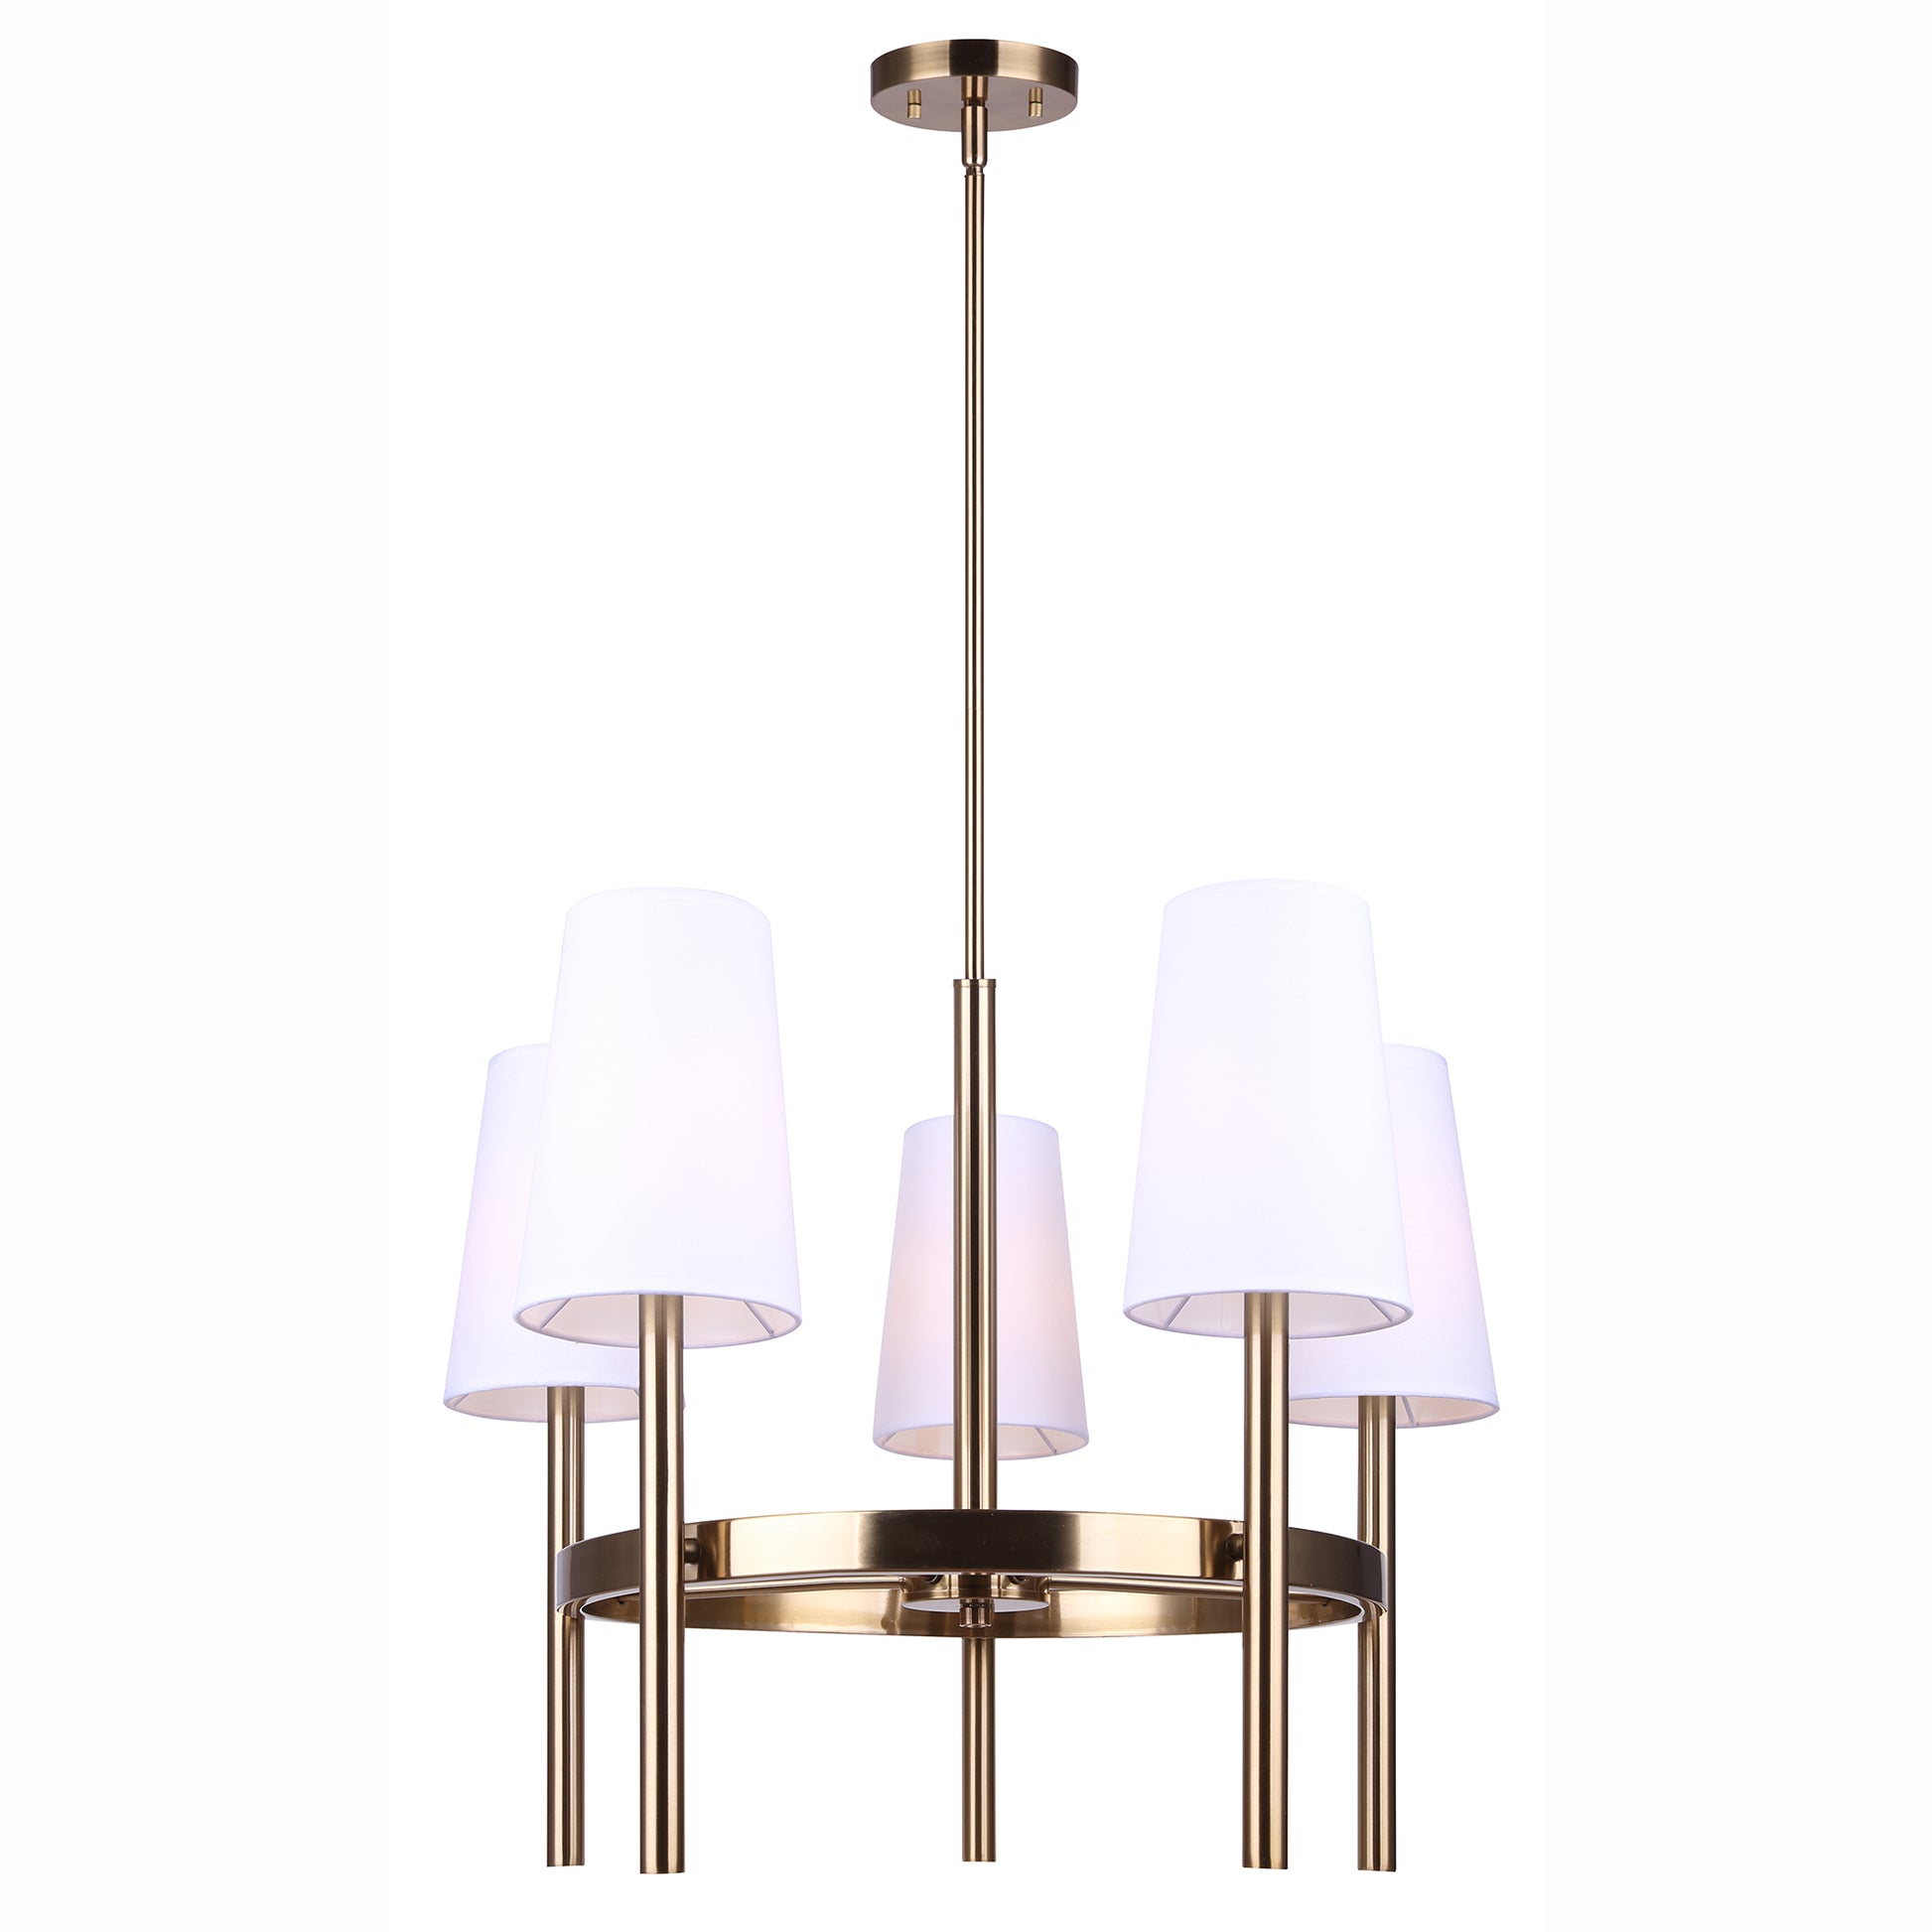 photo of 5 light chandelier in gold finish with white shades